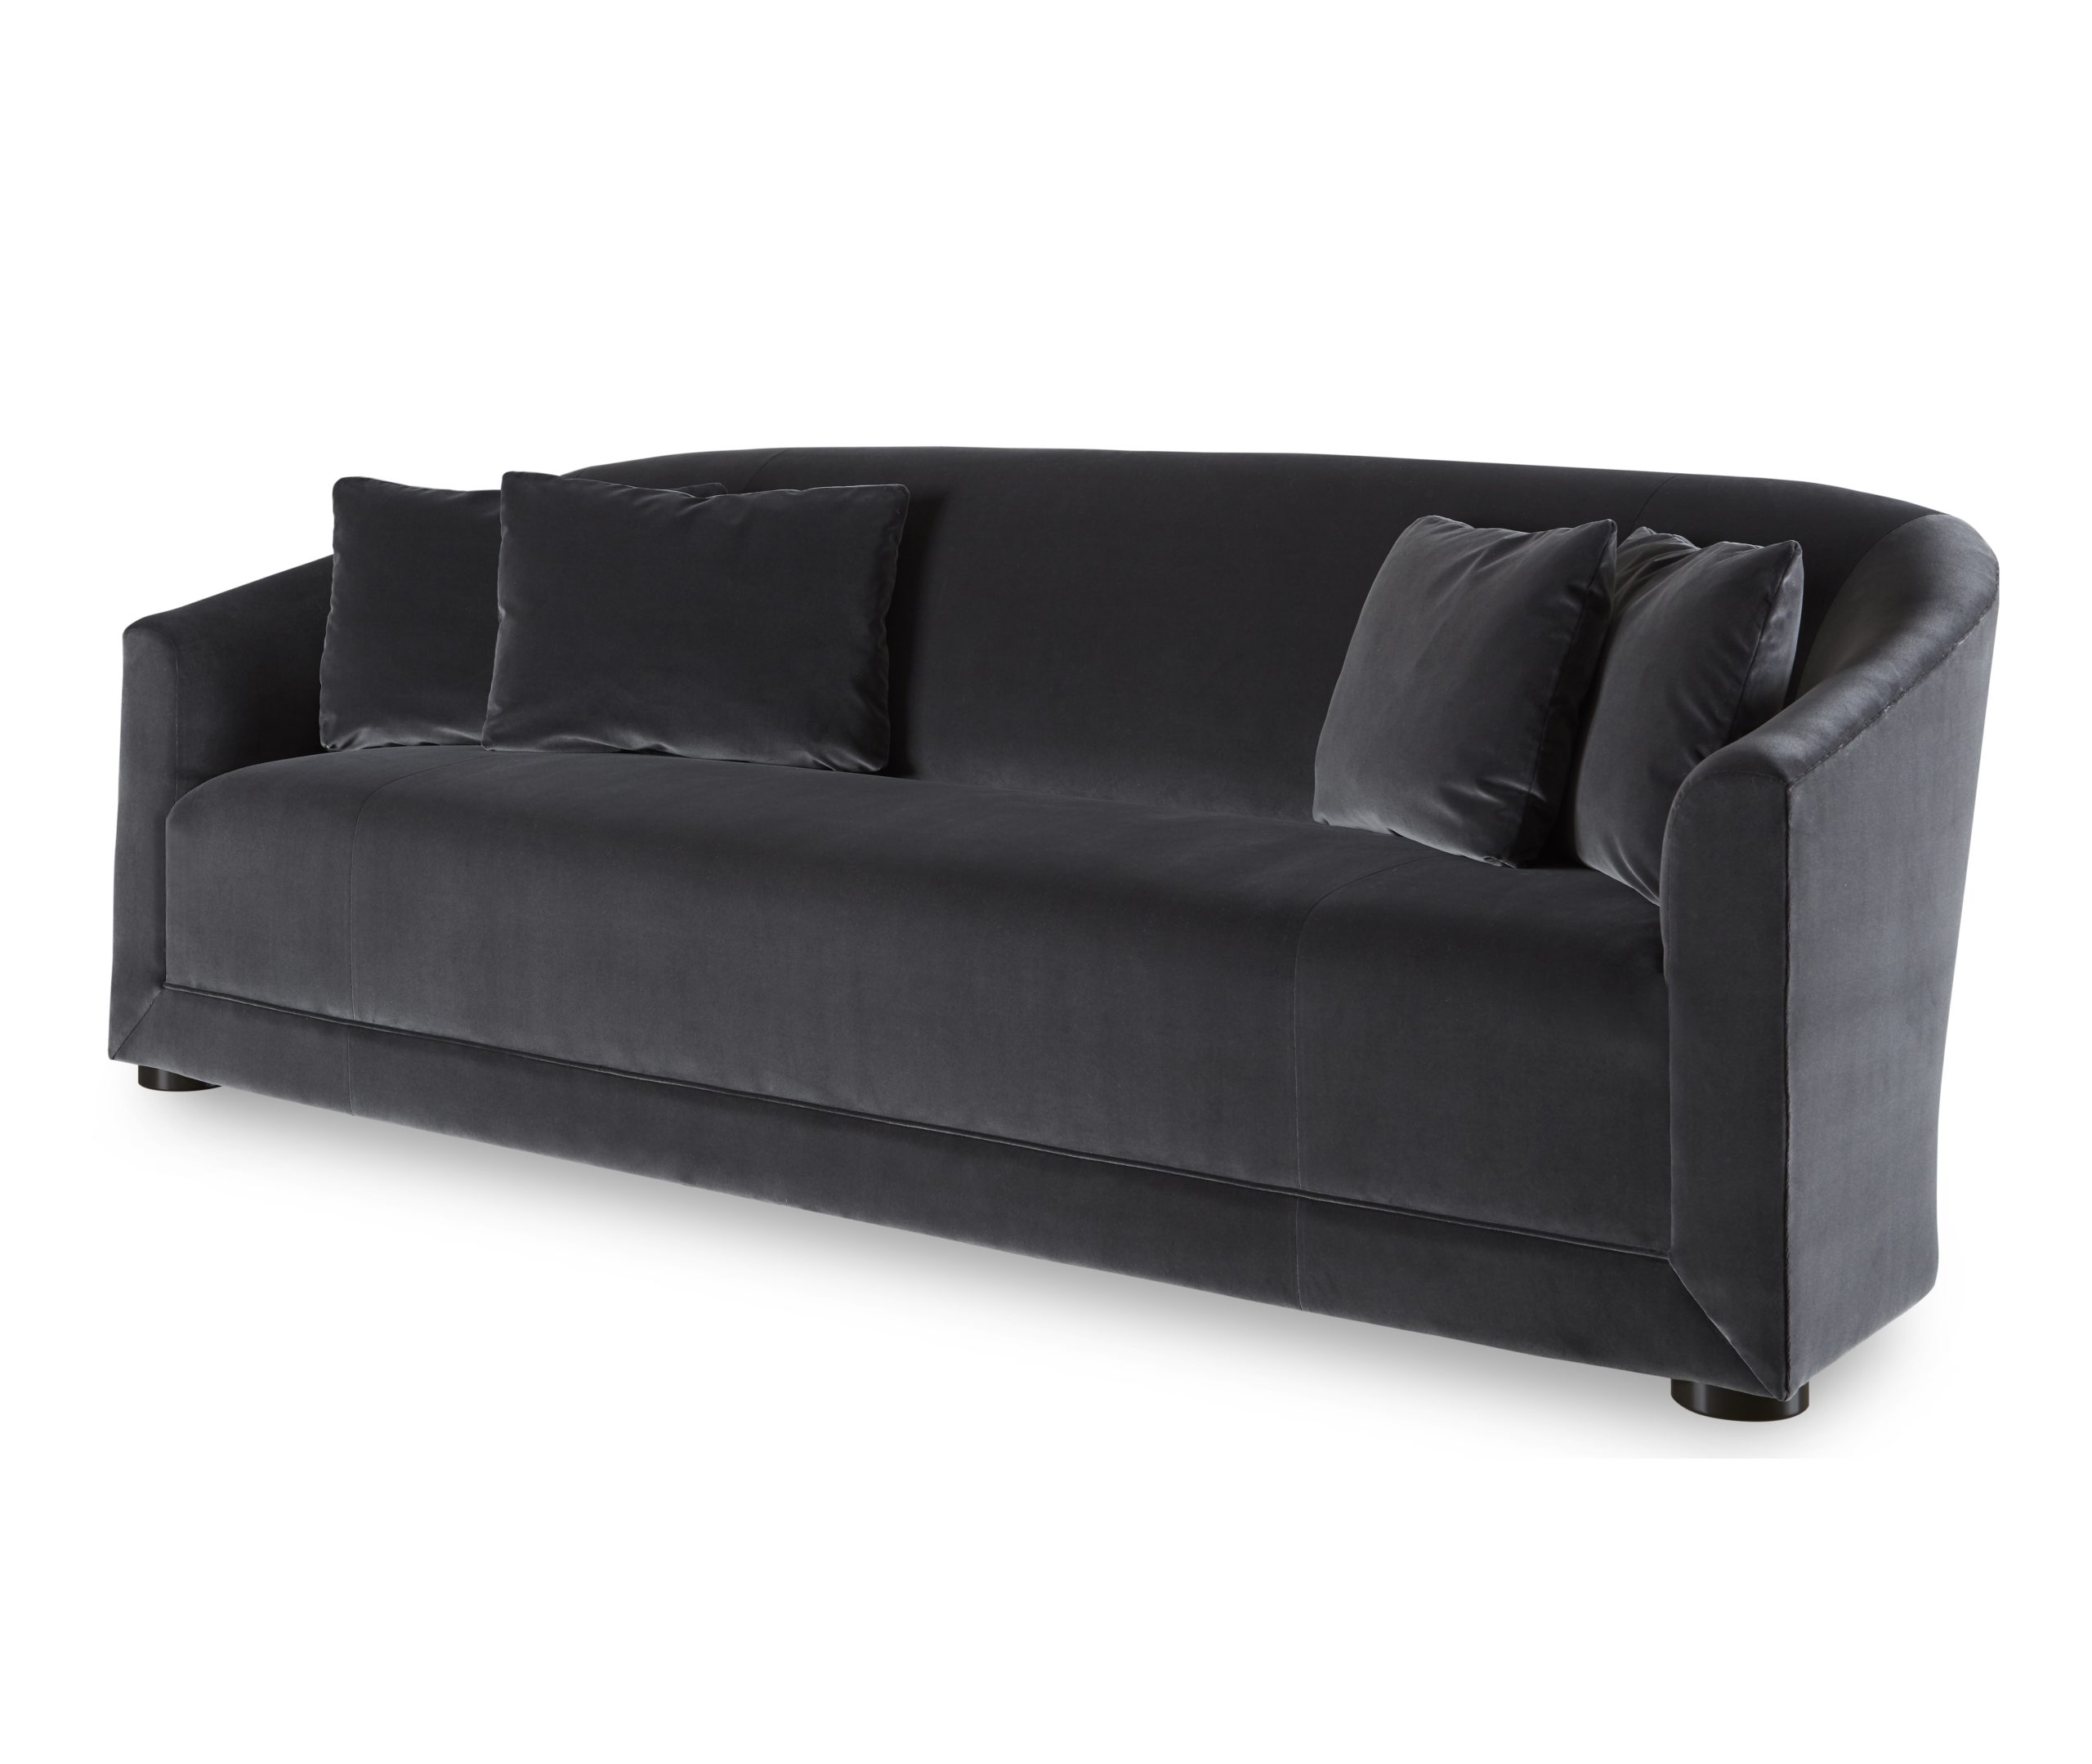 Baker_products_WNWN_anton_sofa_BAU3106S_FRONT_3QRT-scaled-1